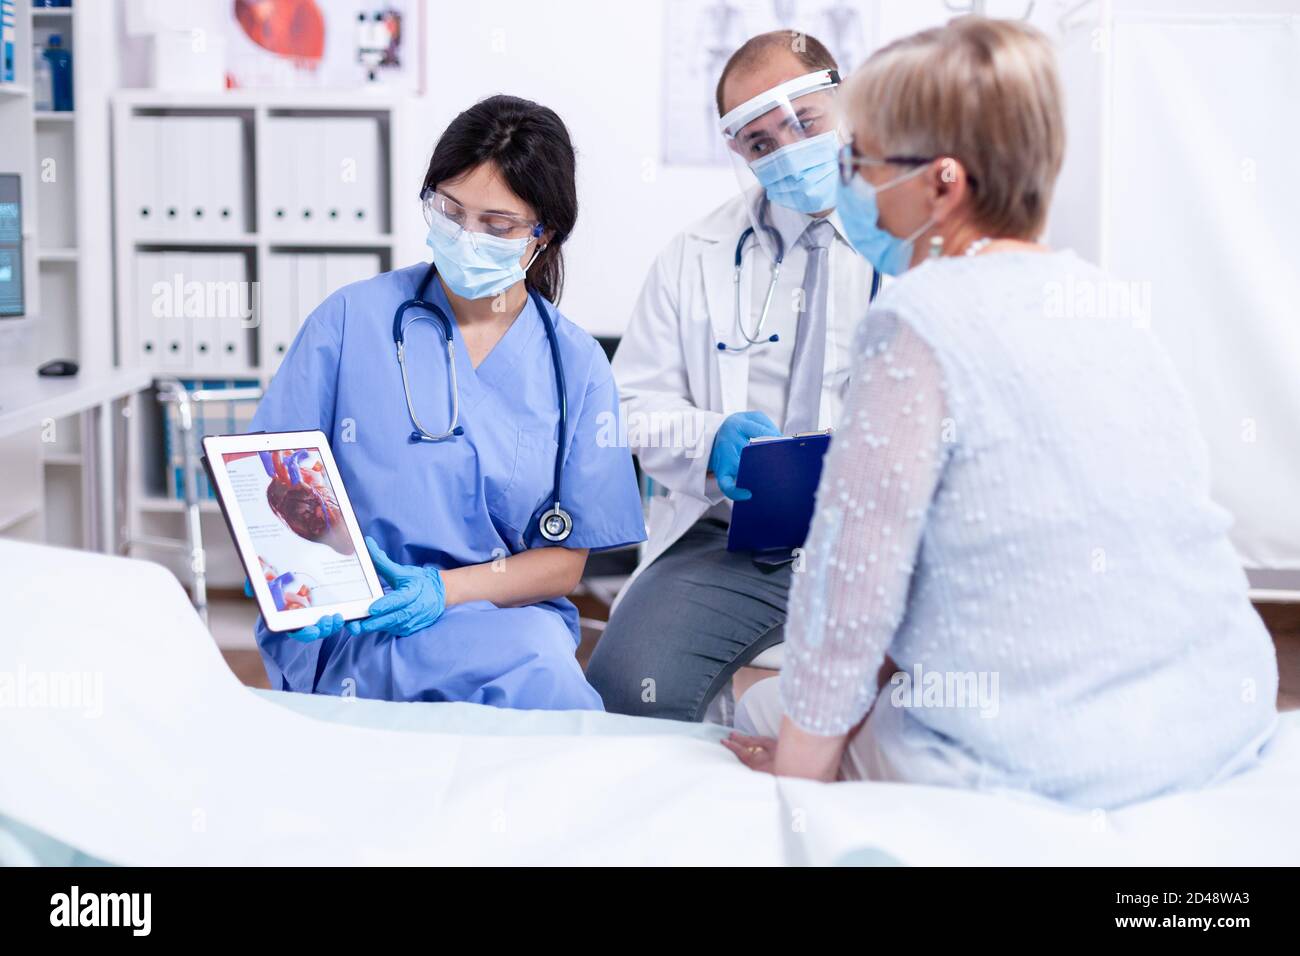 Cartdiologist telling senior woman what's wrong with her coronary artery during consulation in clinic examination room. Medical control for infections, disease and diagnosis. Stock Photo